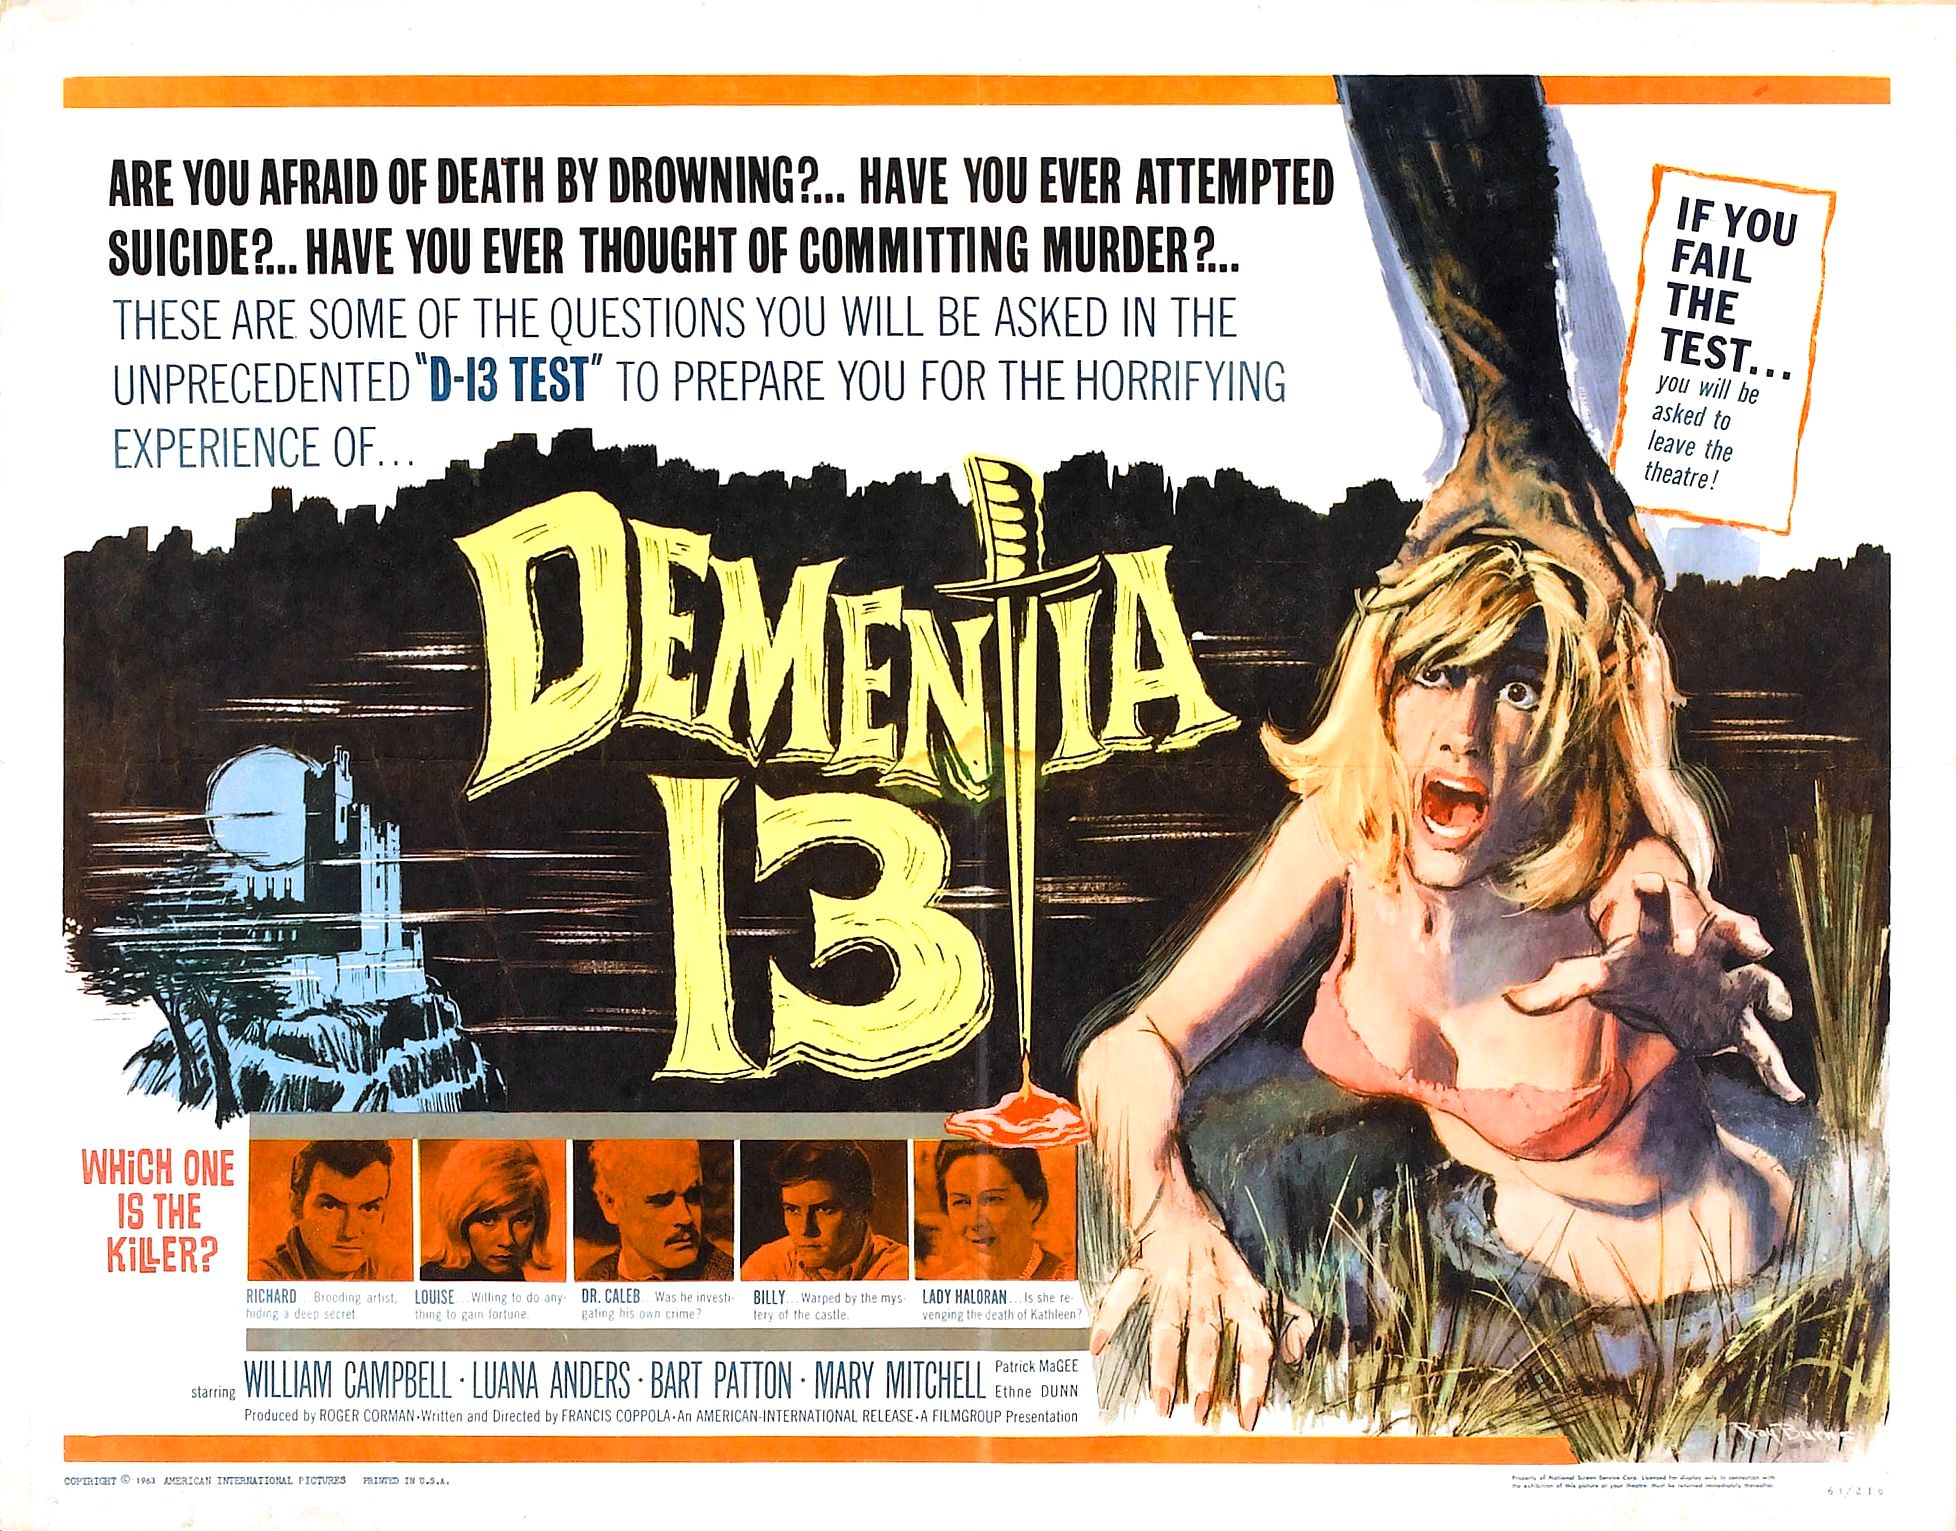 dementia 13 francis ford coppola - If You Are You Afraid Of Death By Drowning?.. Have You Ever Attempted Suicide.. Have You Ever Thought Of Committing Murder 2... These Are Some Of The Questions You Will Be Asked In The Unprecedented D13 Test To Prepare Y